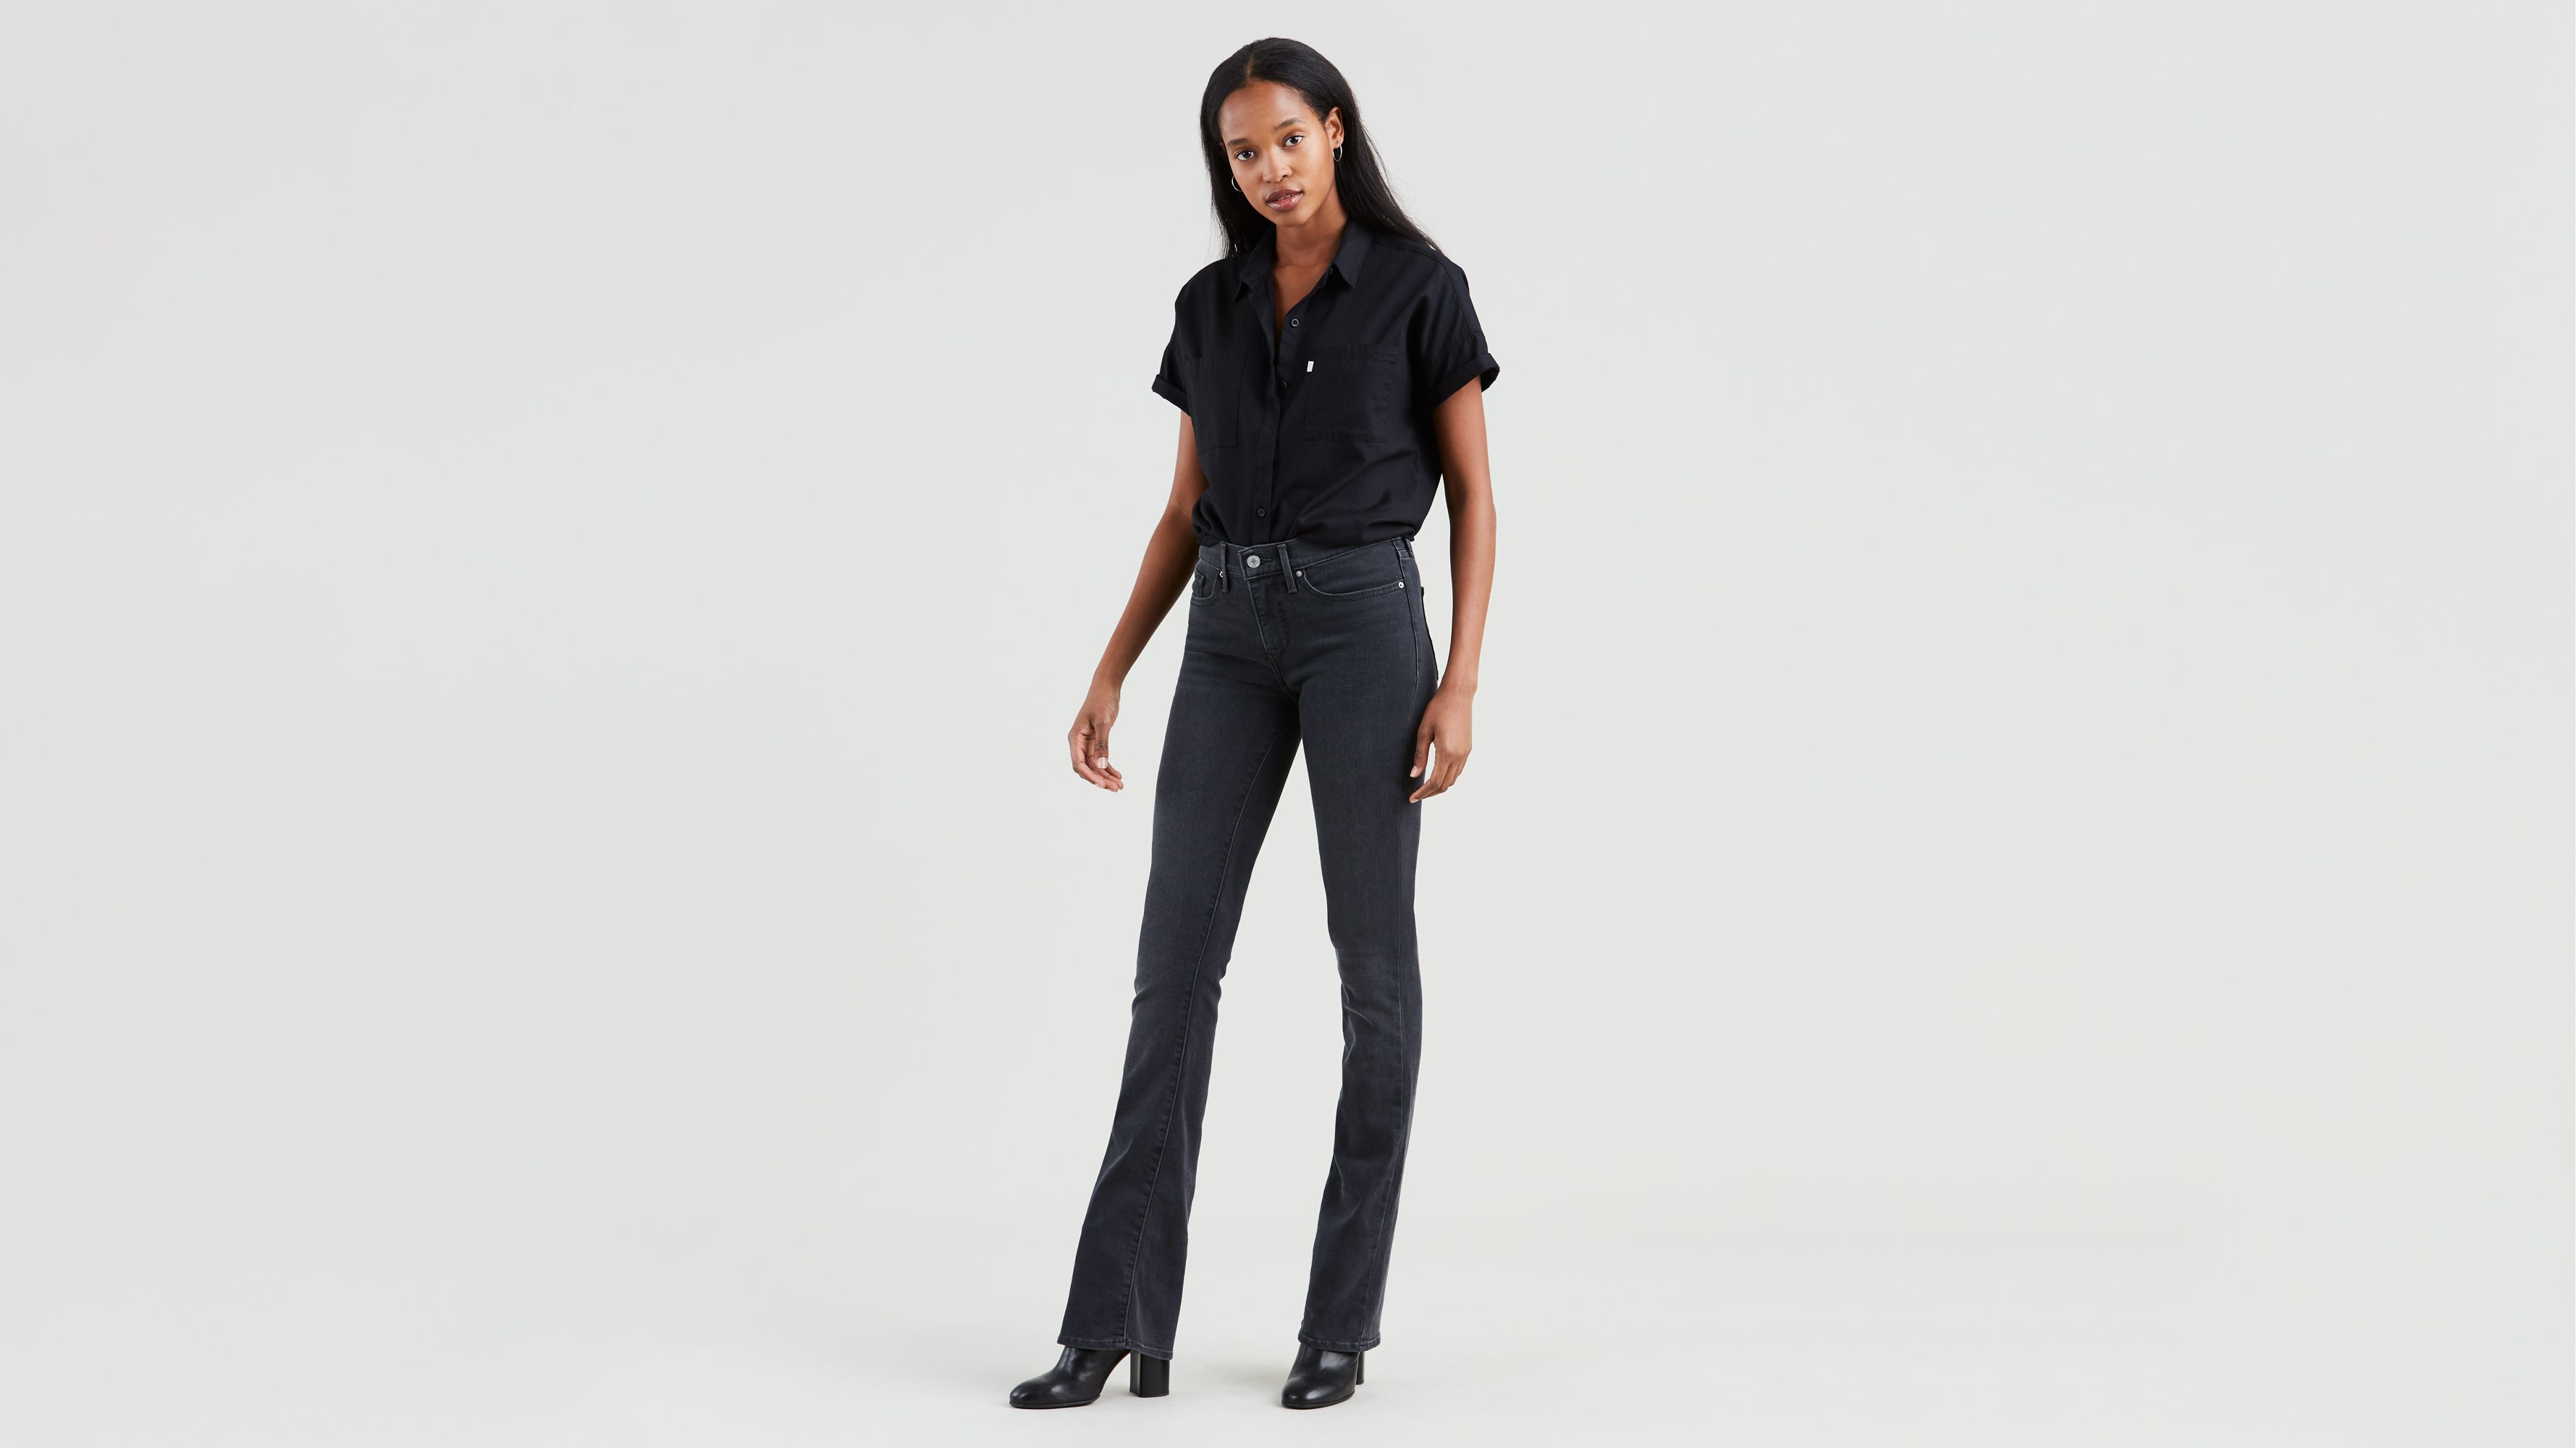 levi's slimming bootcut womens